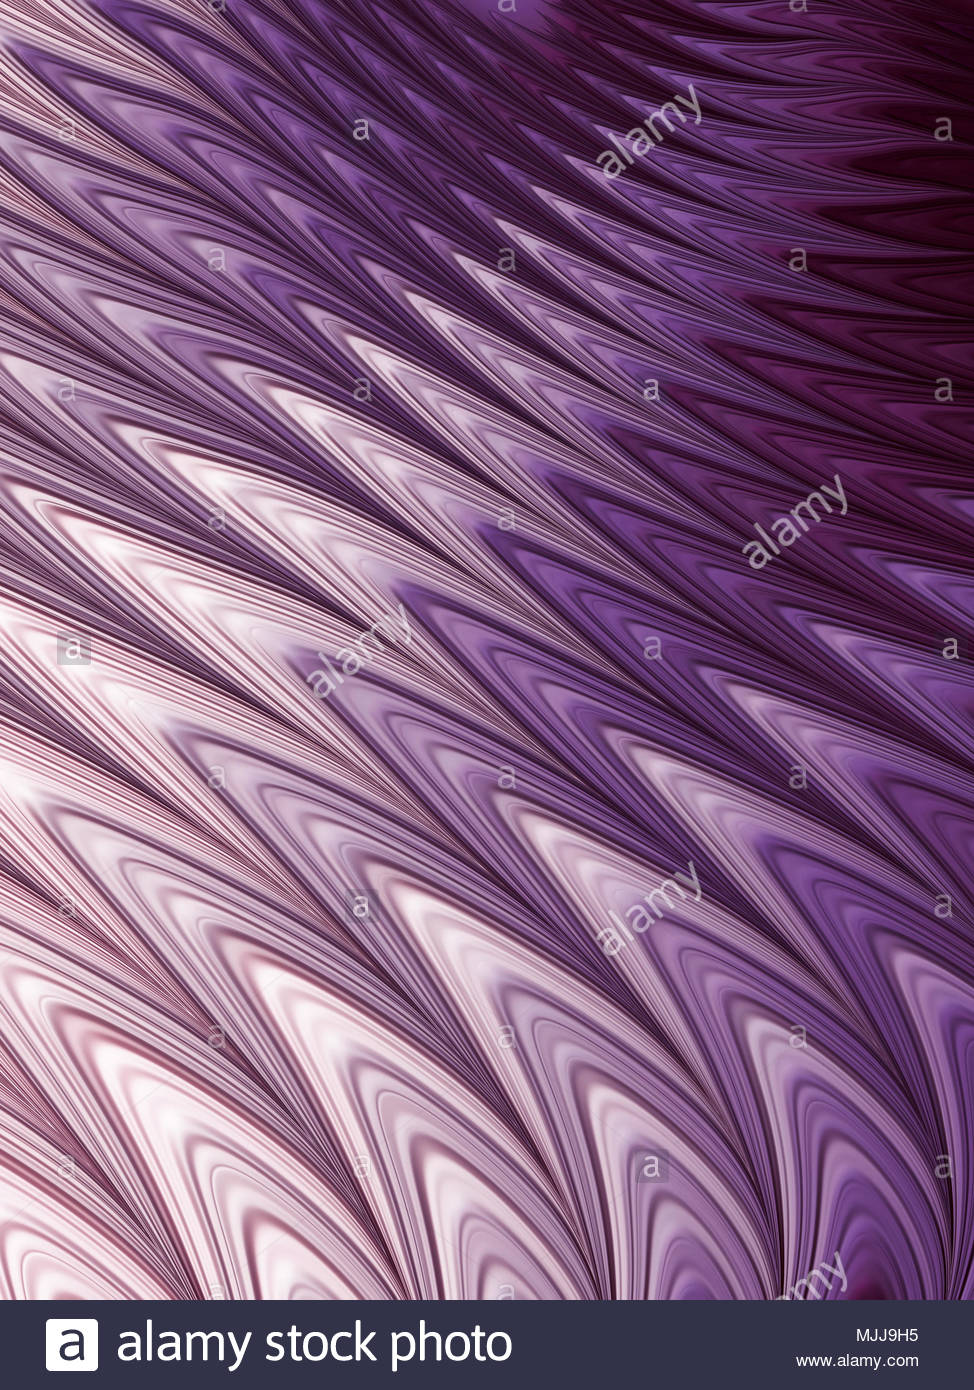 Dark Pink Fractal Wallpaper Background With Smooth Wavy Lines